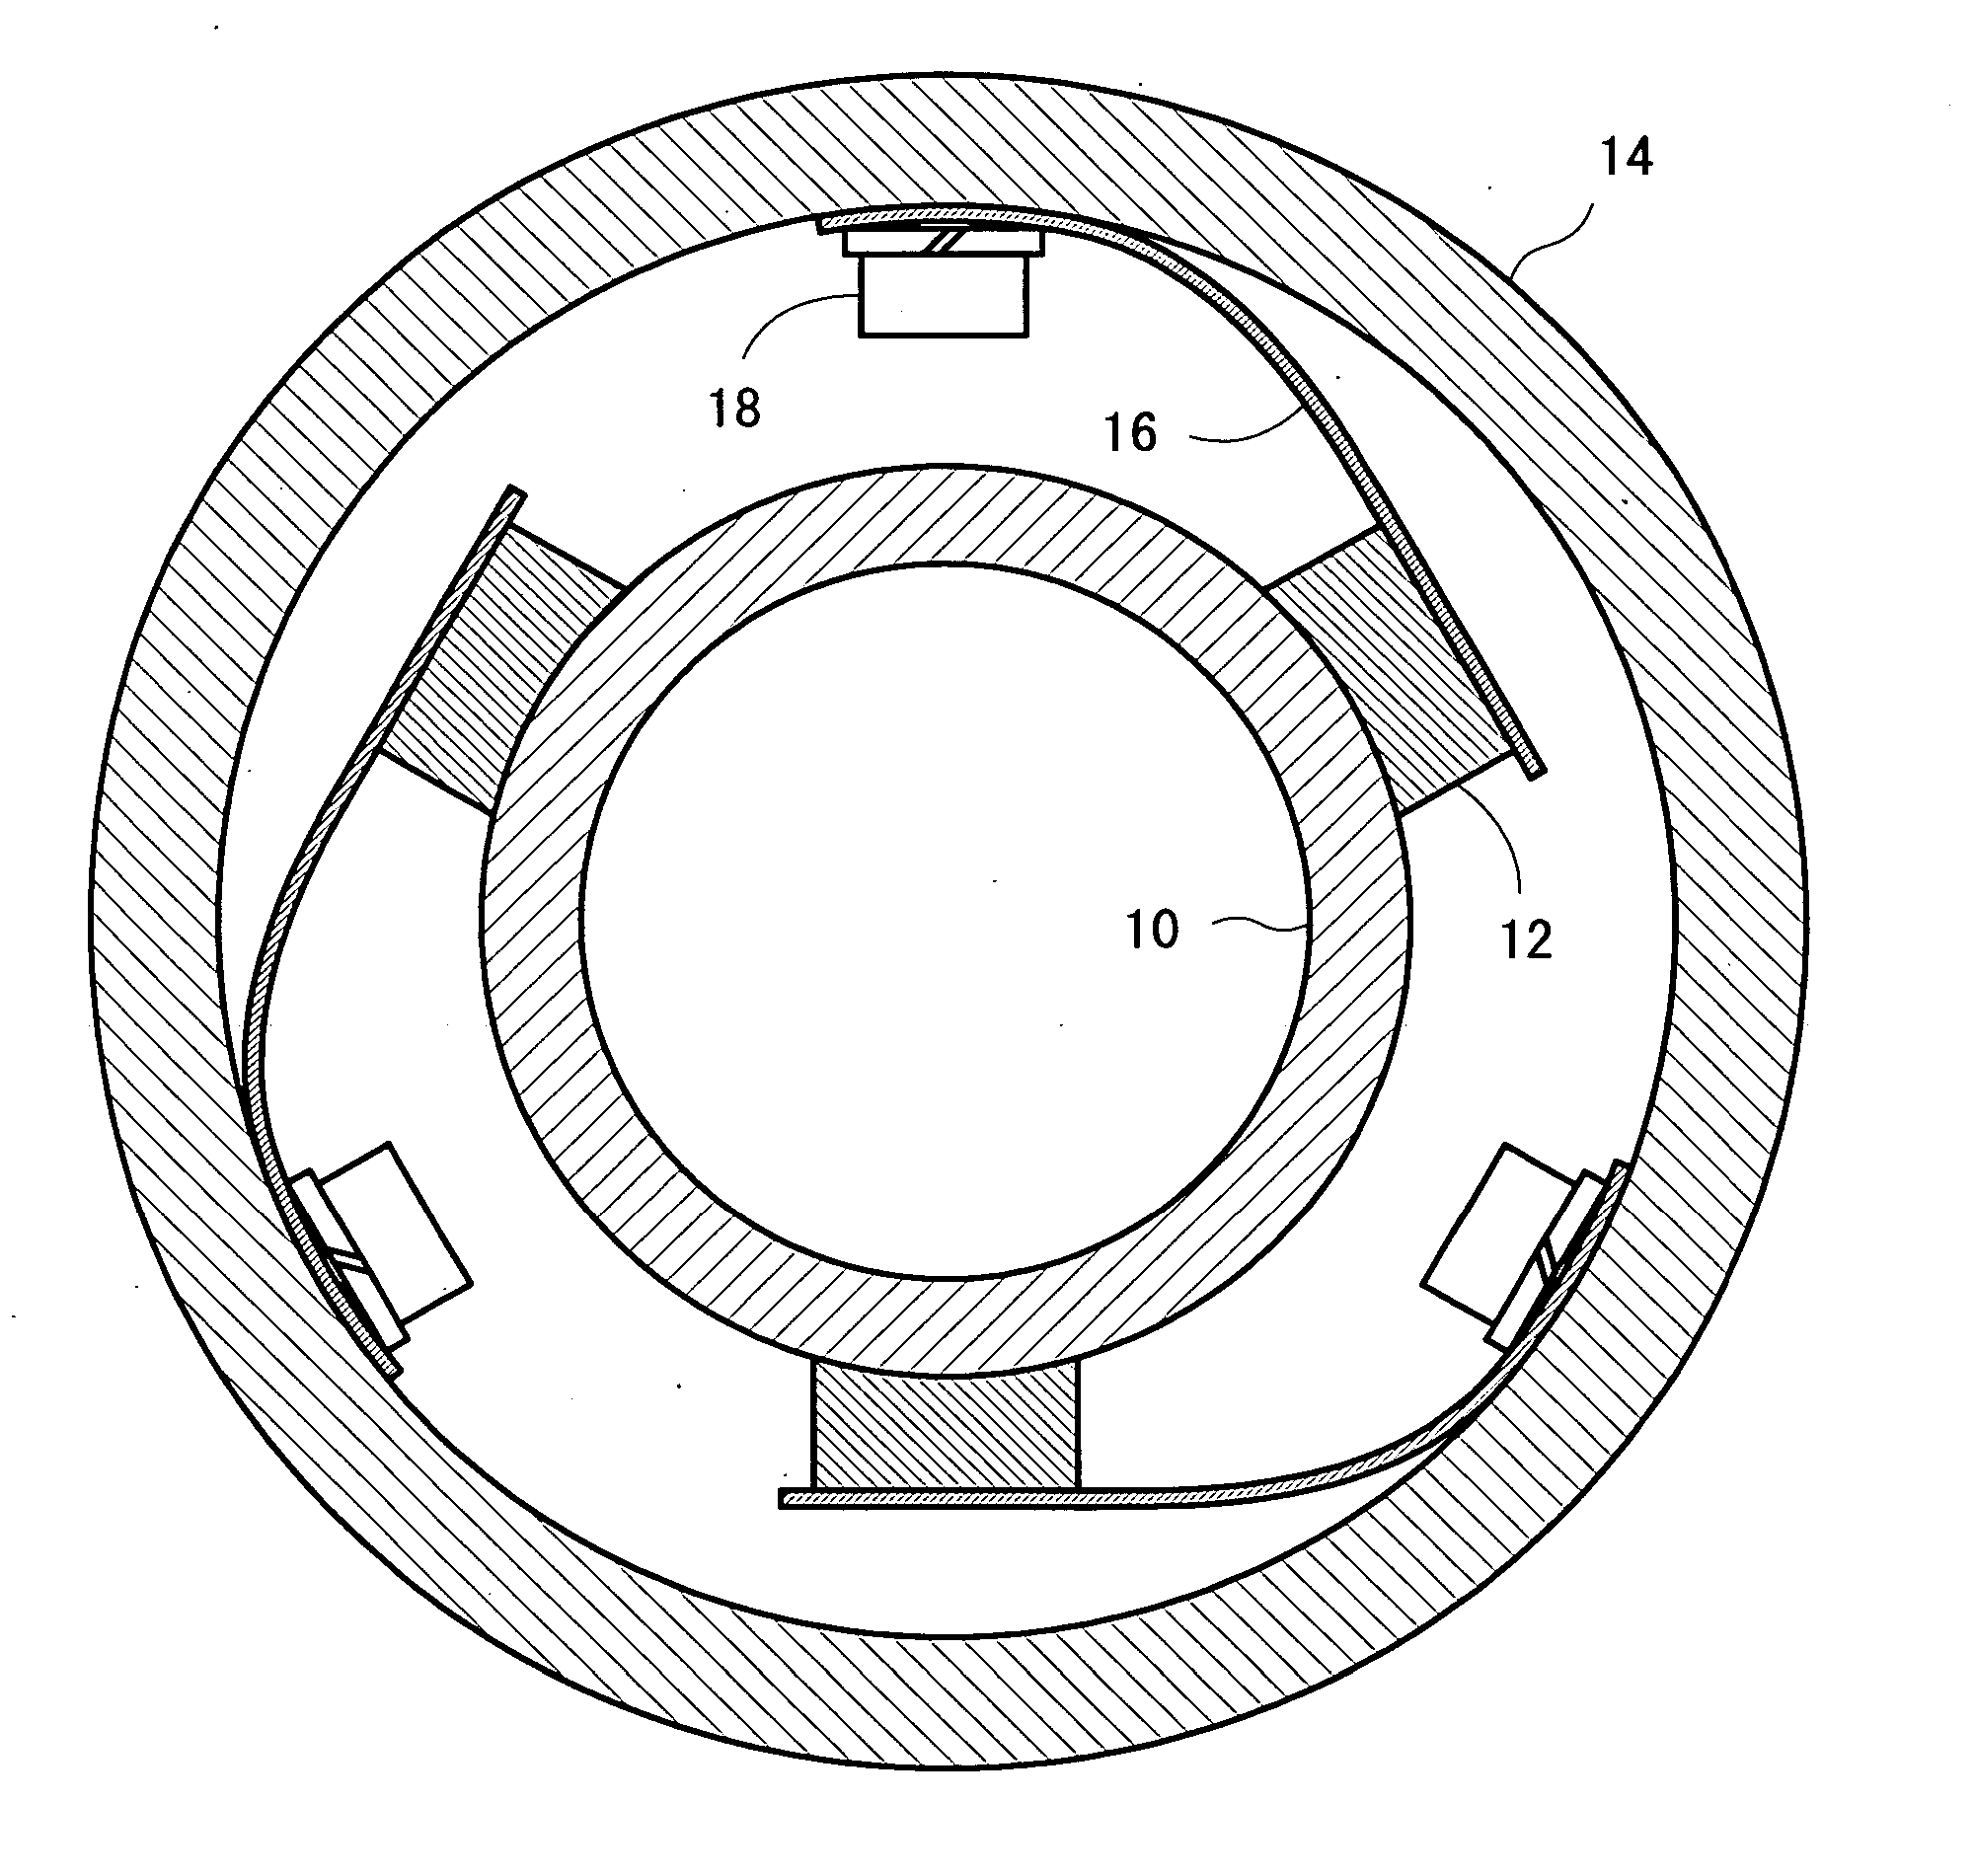 Rotary current-collecting device and rotating anode X-ray tube